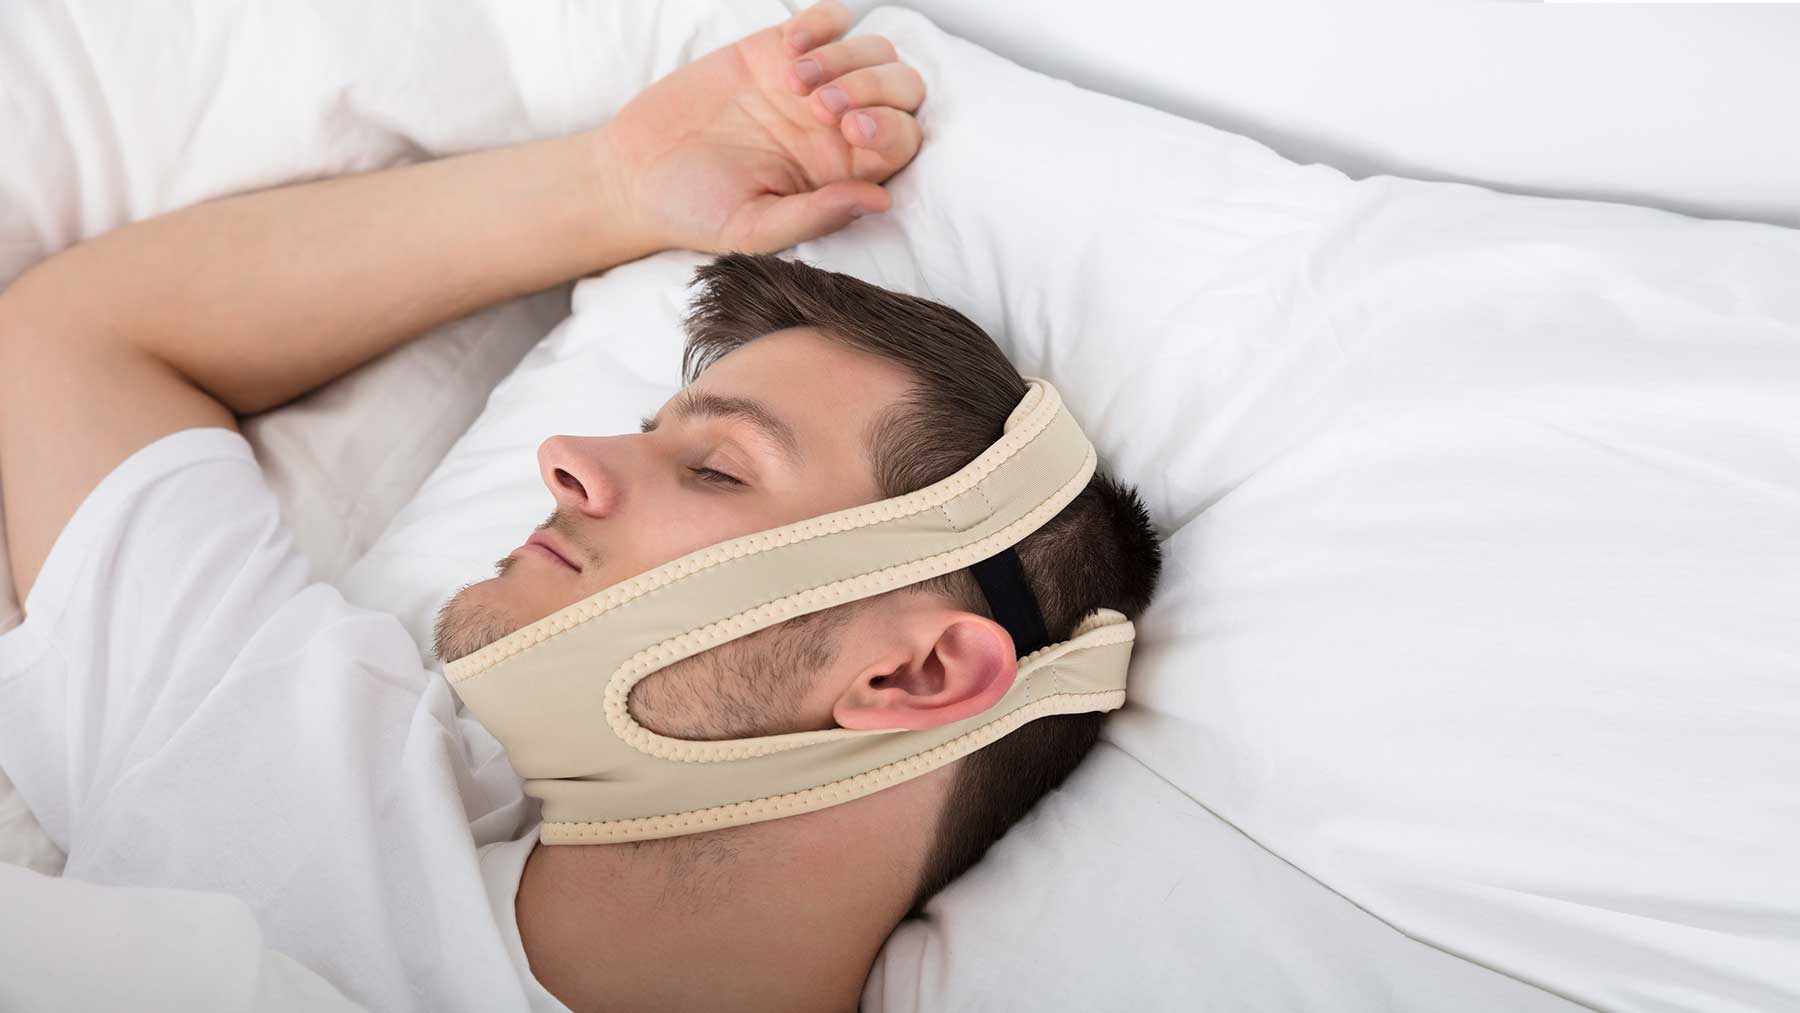 How To Stop Snoring?